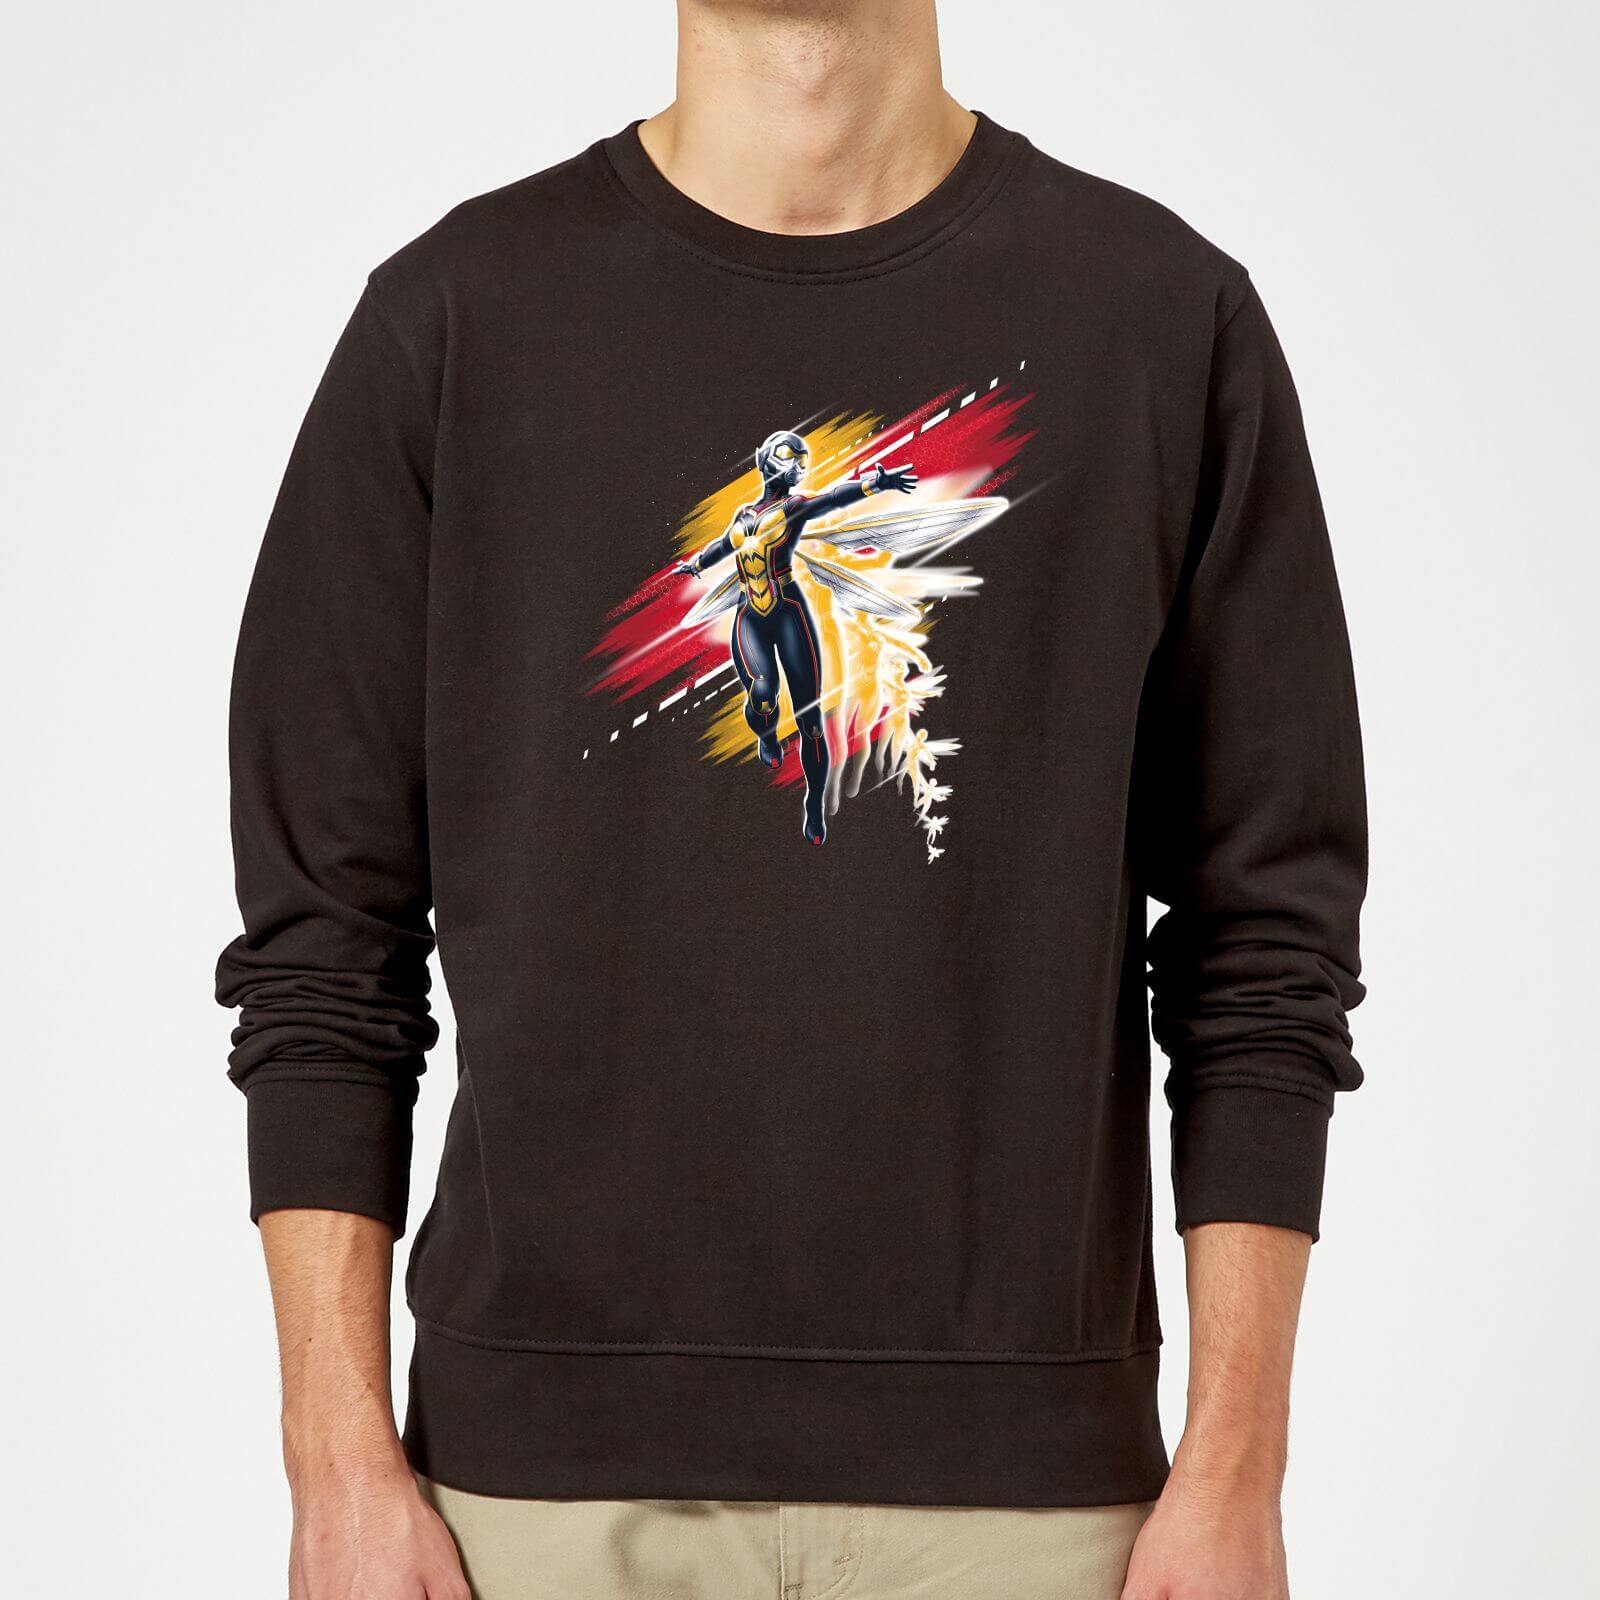 Ant-Man And The Wasp Brushed Pullover - Schwarz - S - Schwarz